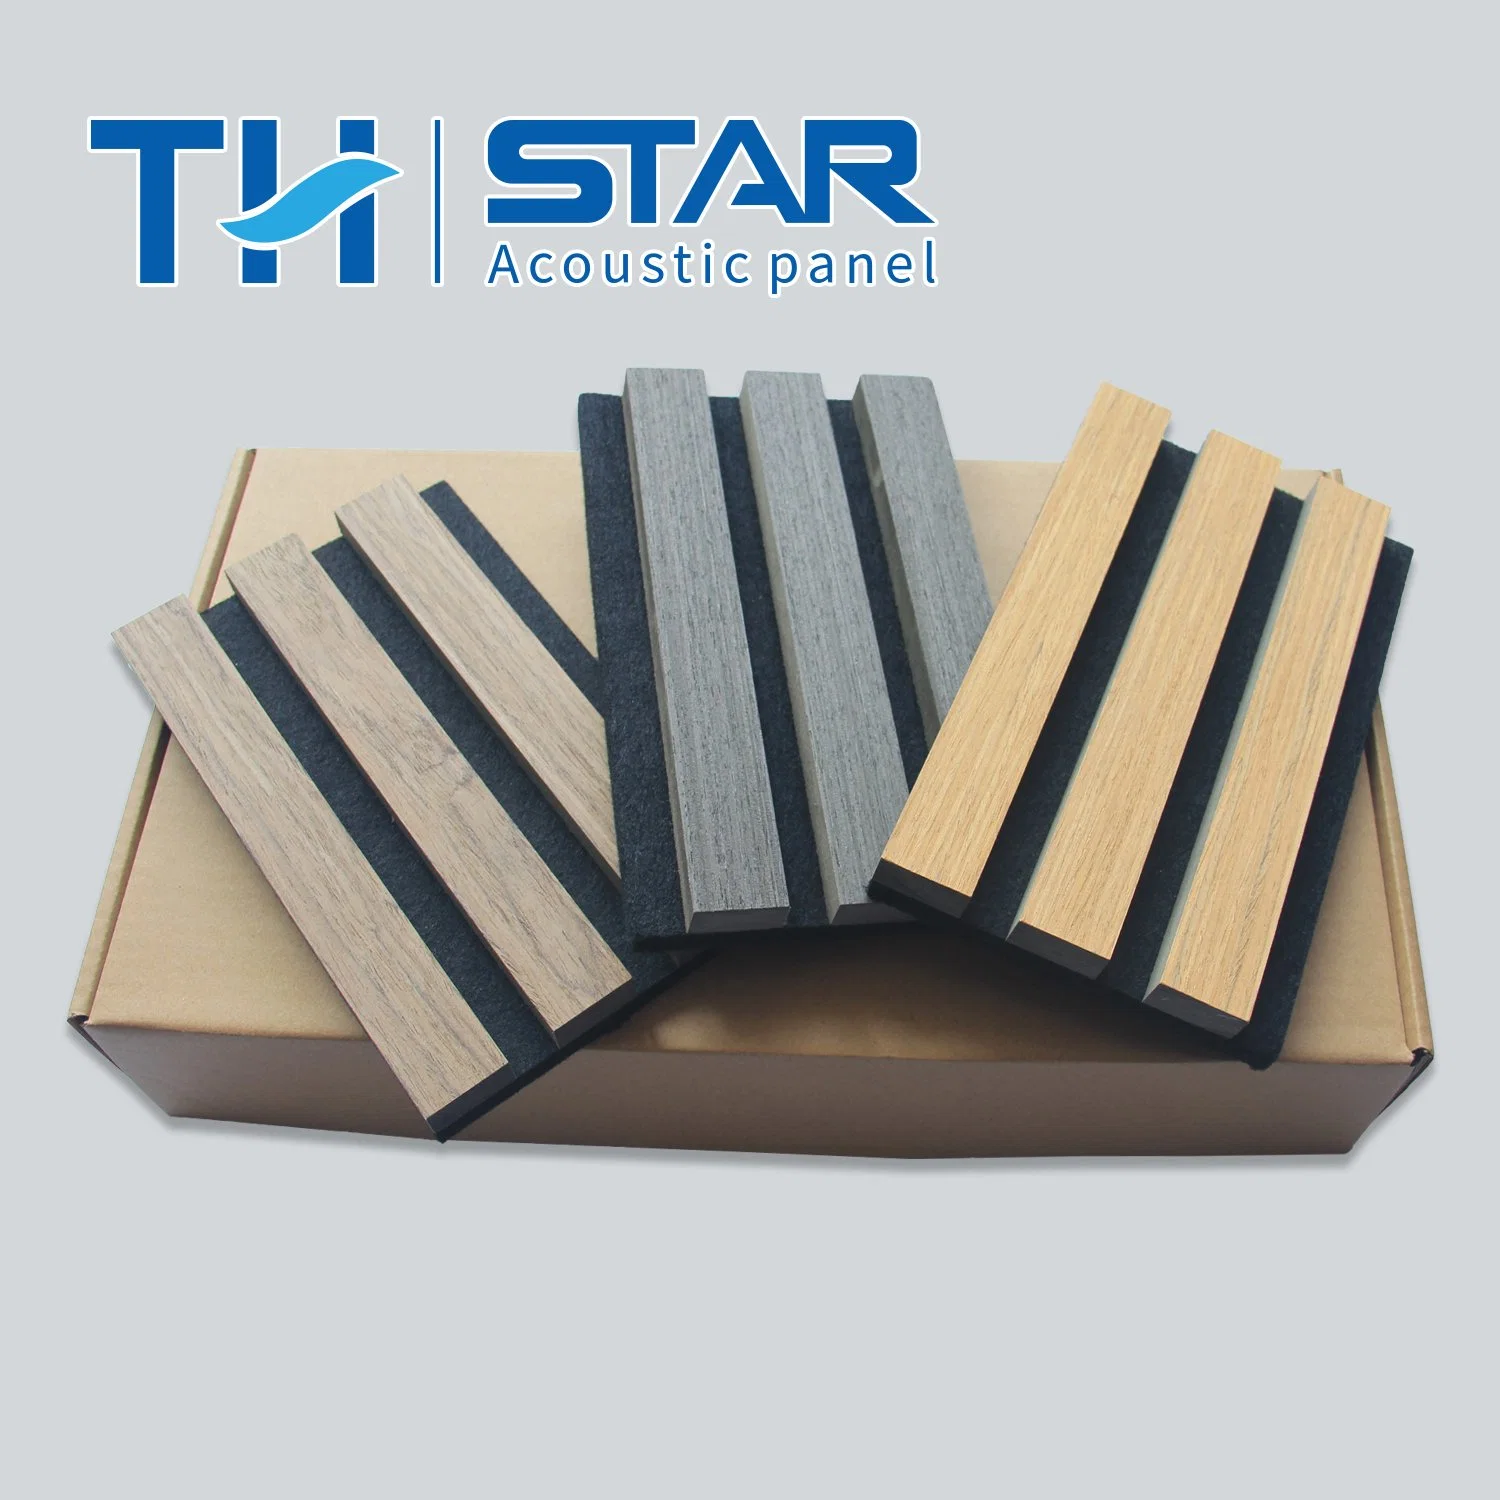 Handcrafted Wooden Slat Acoustic Panel for Office Hotel Wall Decoration MDF Panel Acoustic